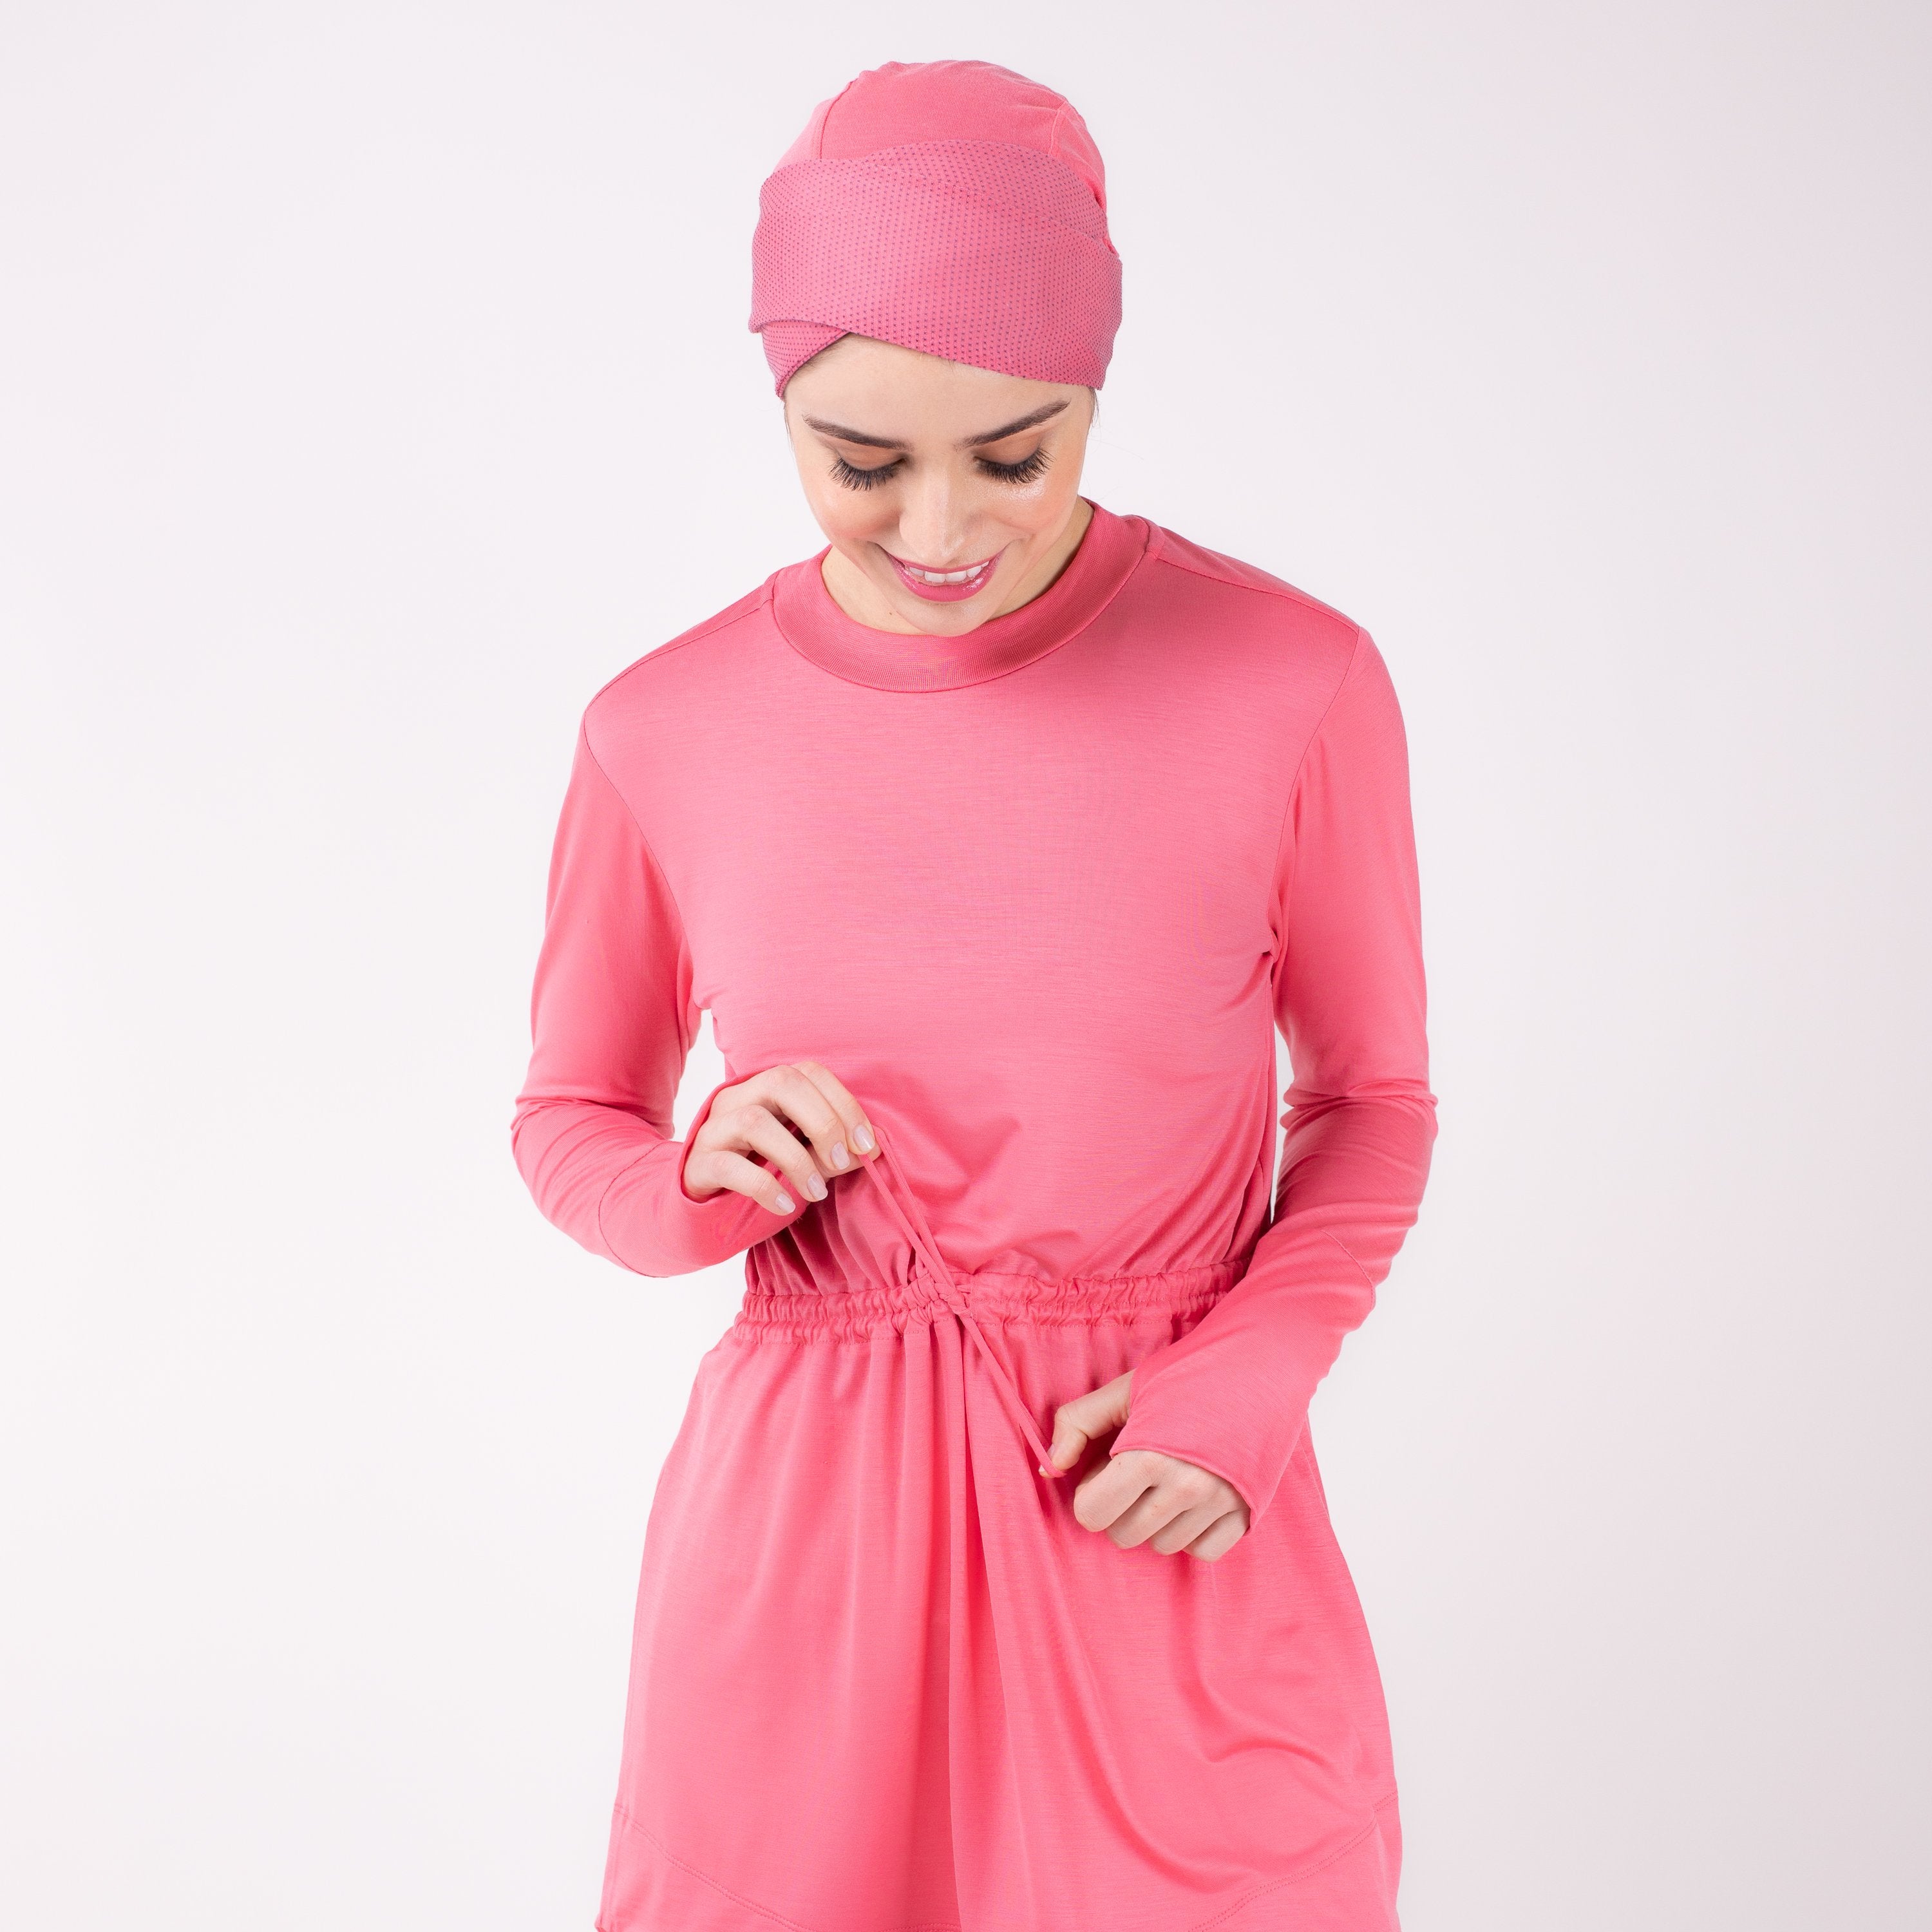 Close up of woman tying the modest, berry pink HAWA drawstring tee shirt with her head bent against a white back drop.